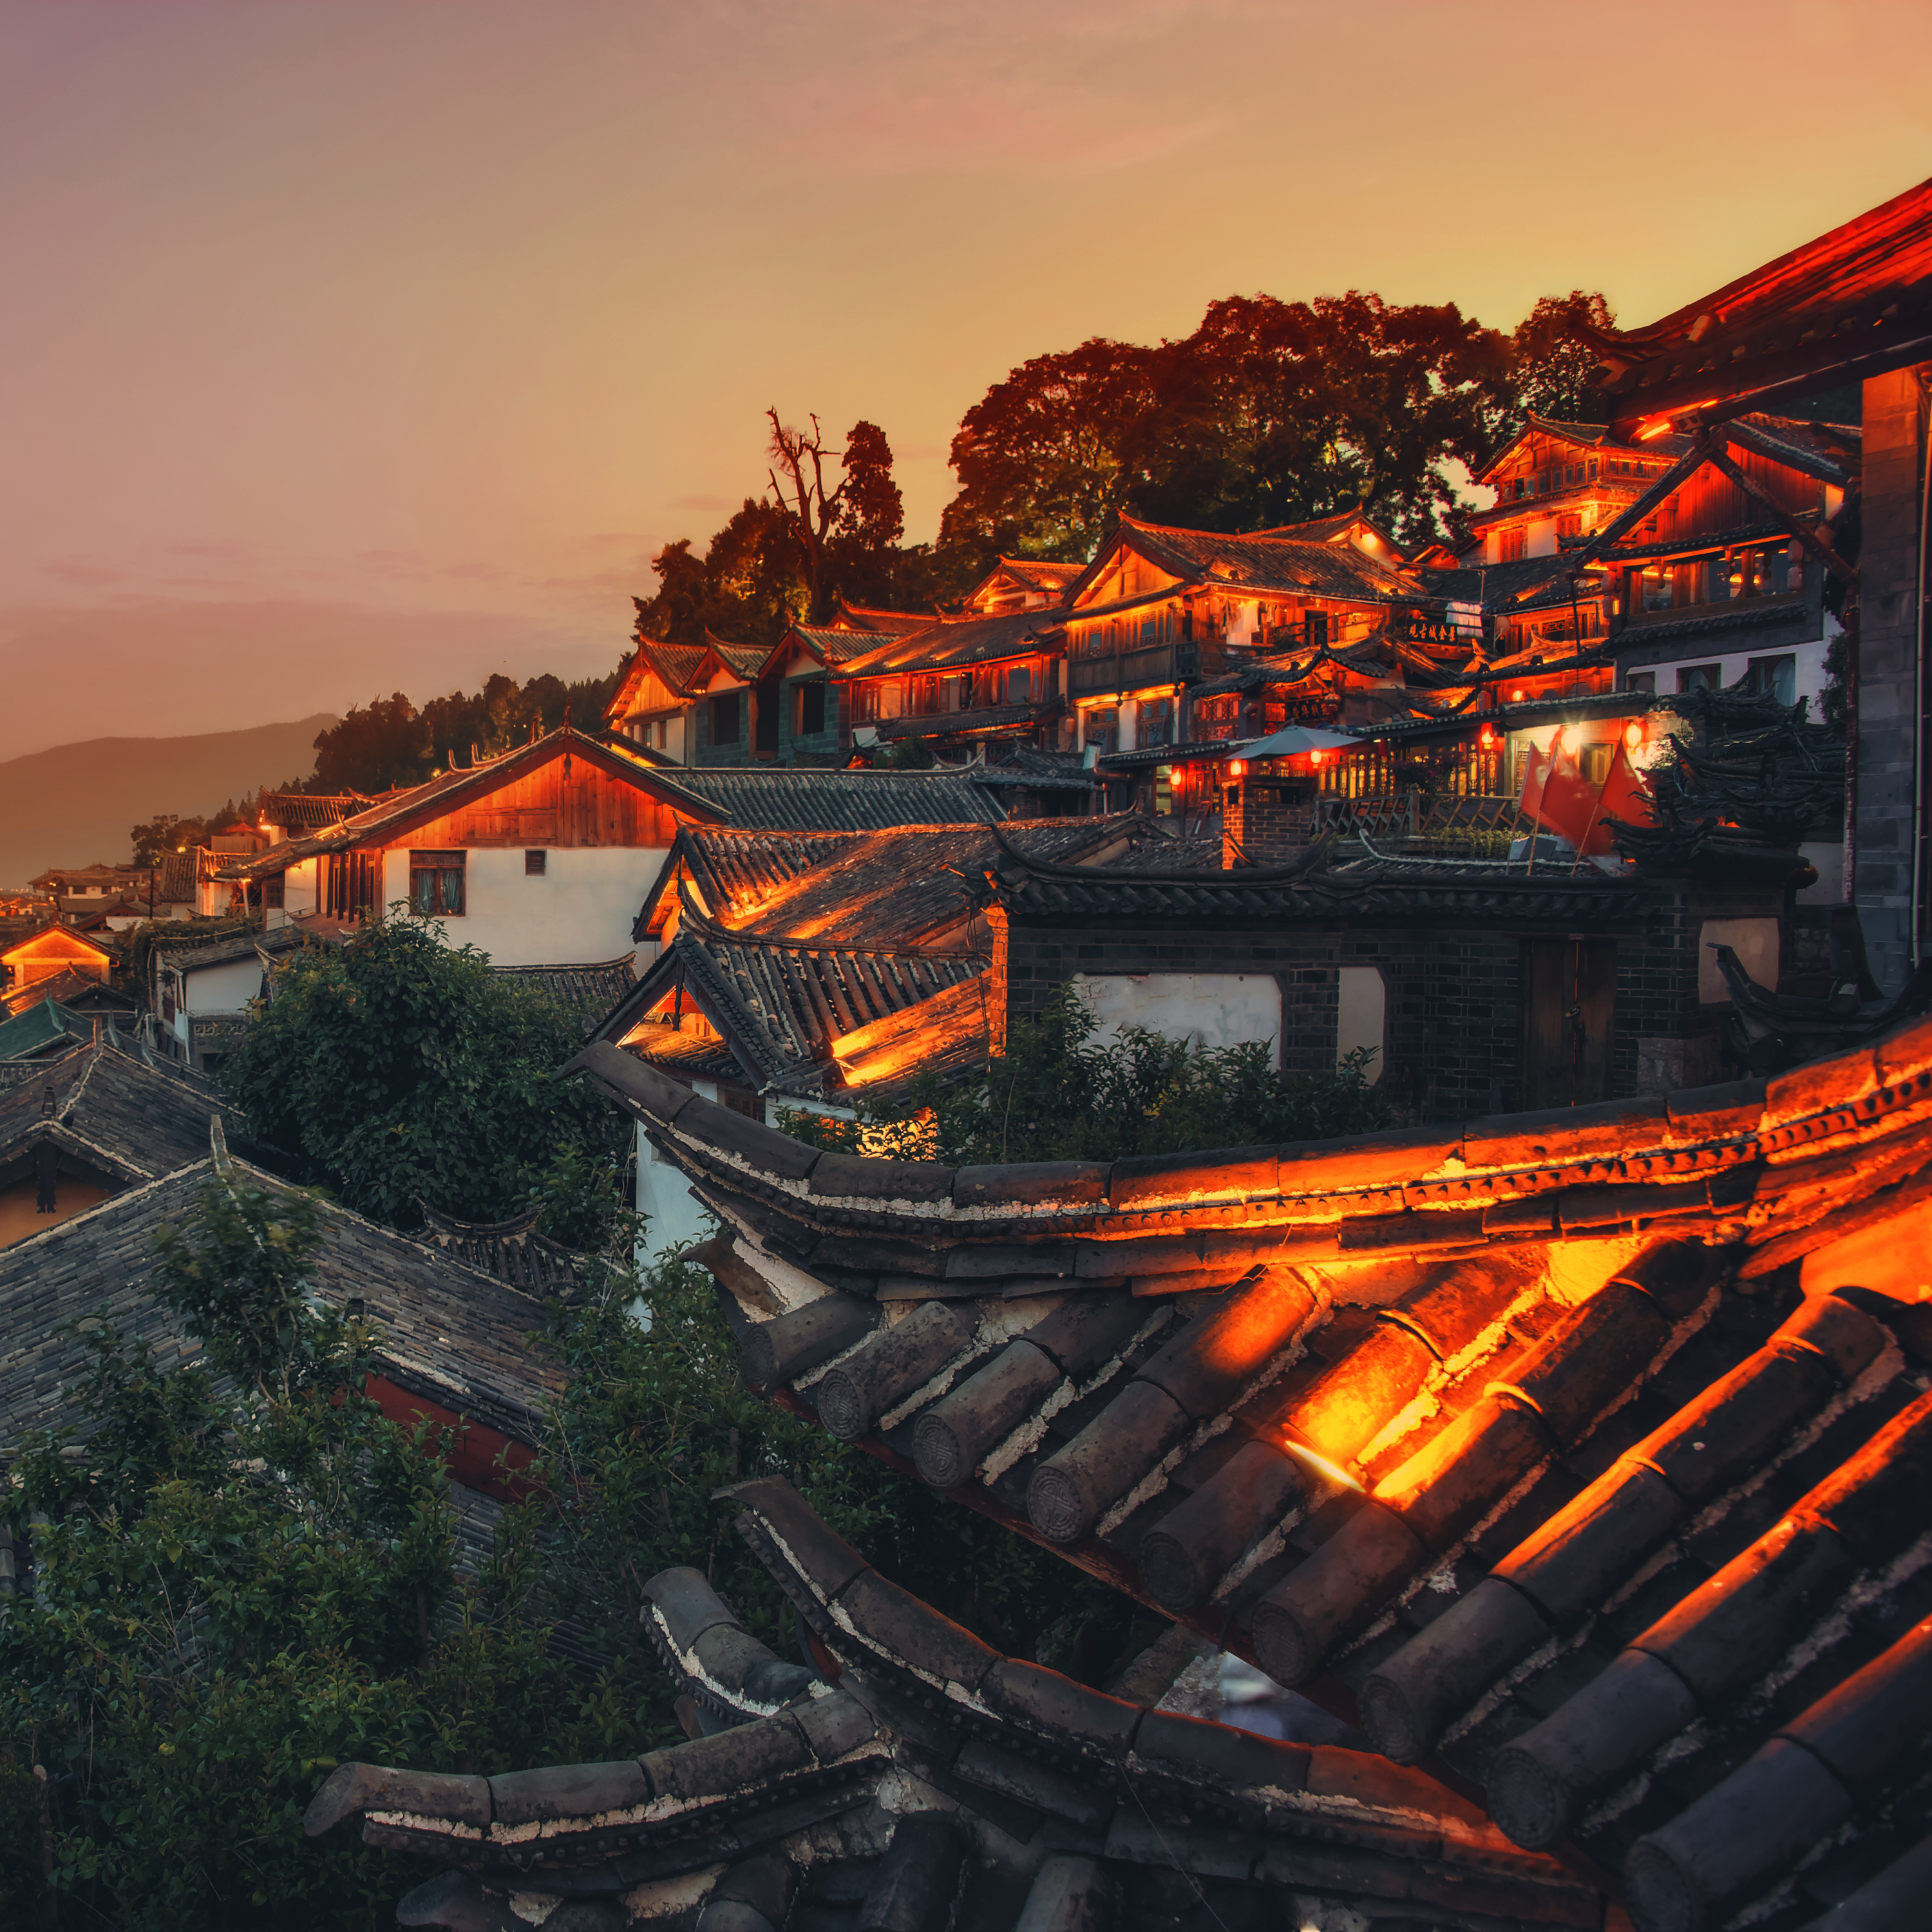 The Infinity of China by Trey Ratcliff